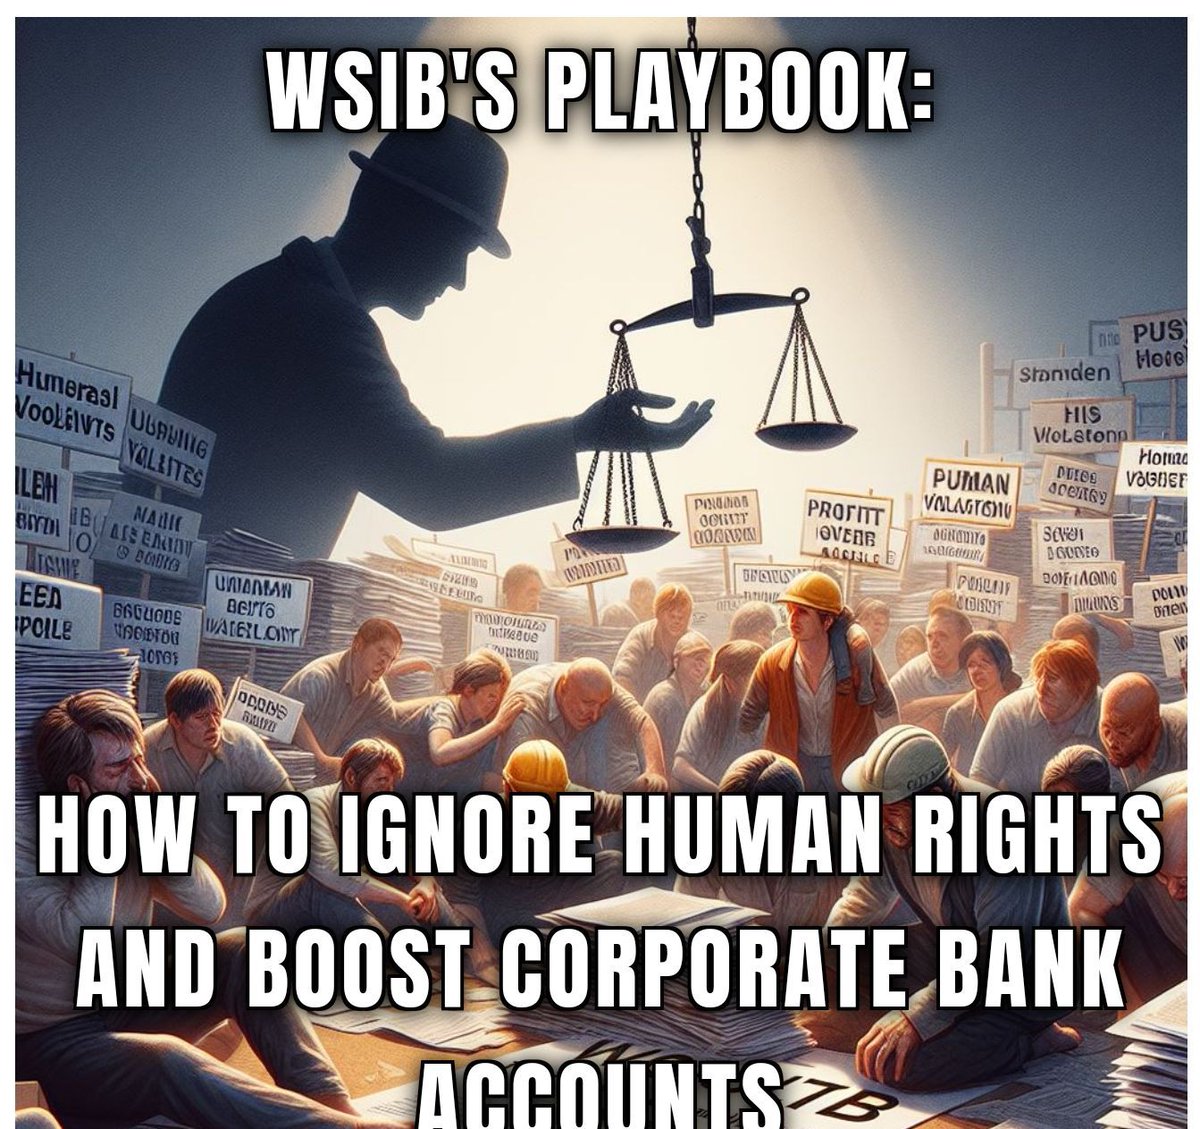 WSIB's playbook: how to ignore human rights and boost corporate bank accounts. 
It's time to rewrite the rules in favor of justice for injured workers! #InjuredWorkers #HumanRights #JusticeForAll